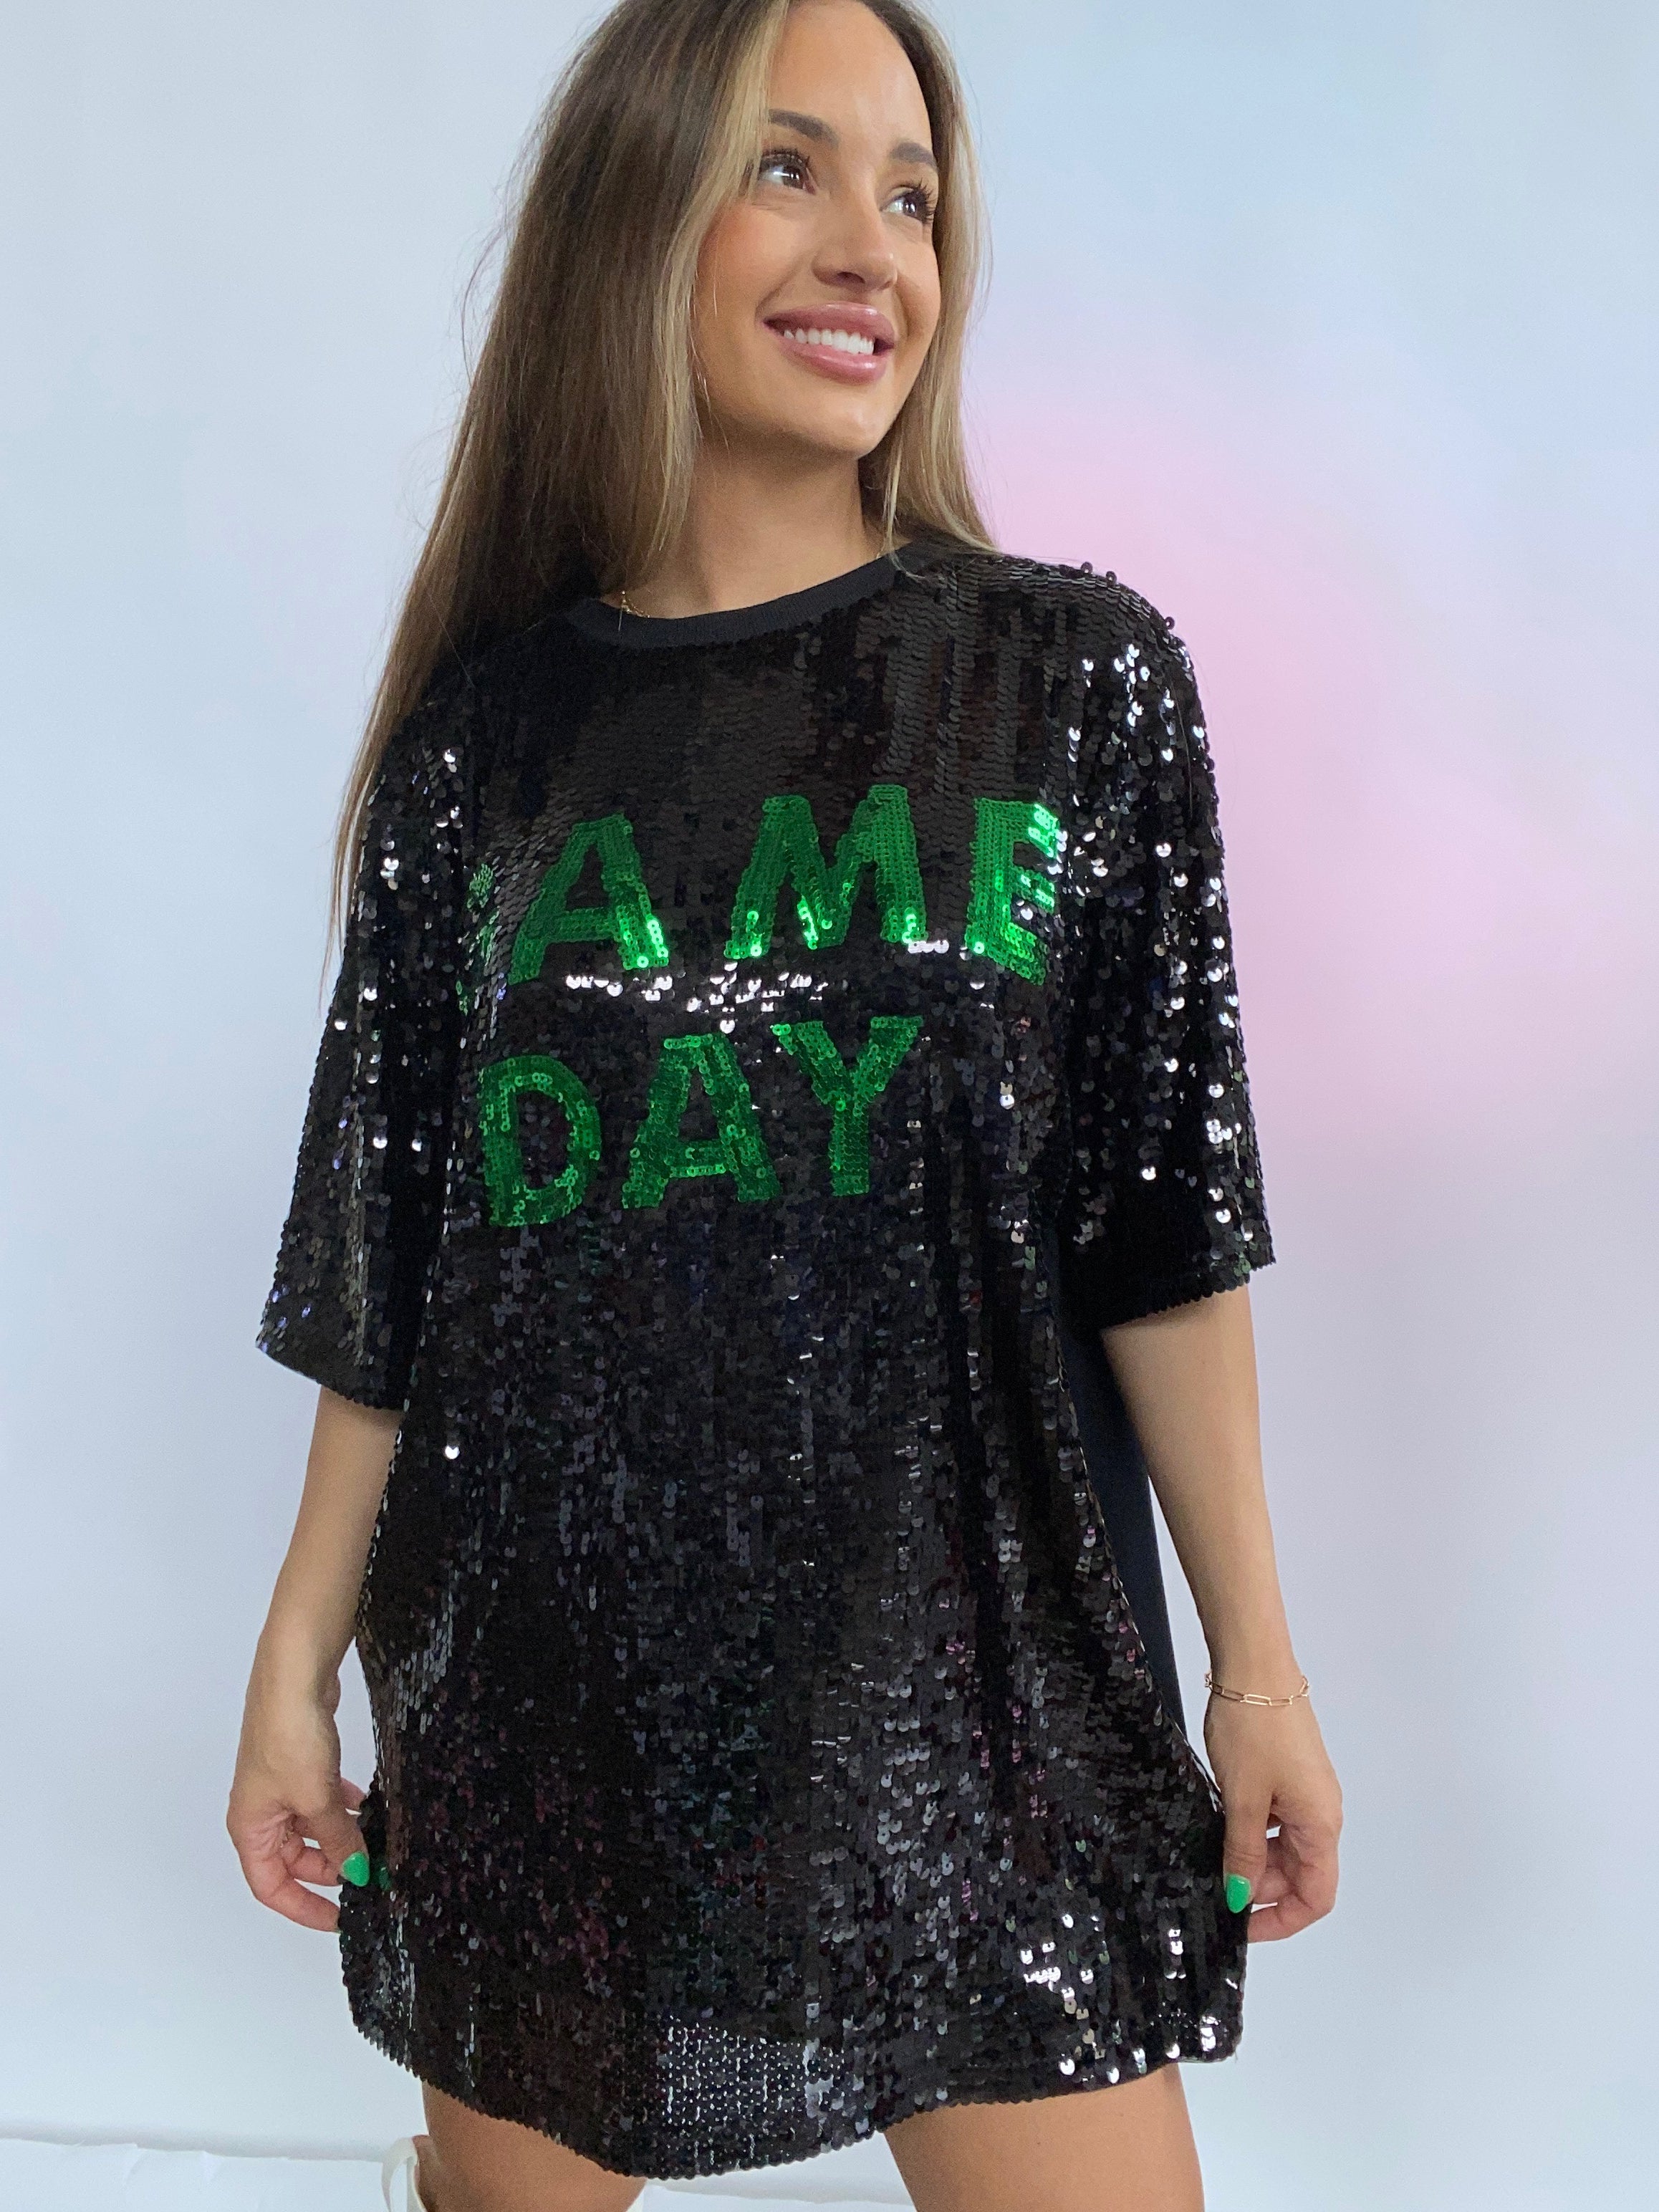 Game Day Sequin Dress - Black and Green